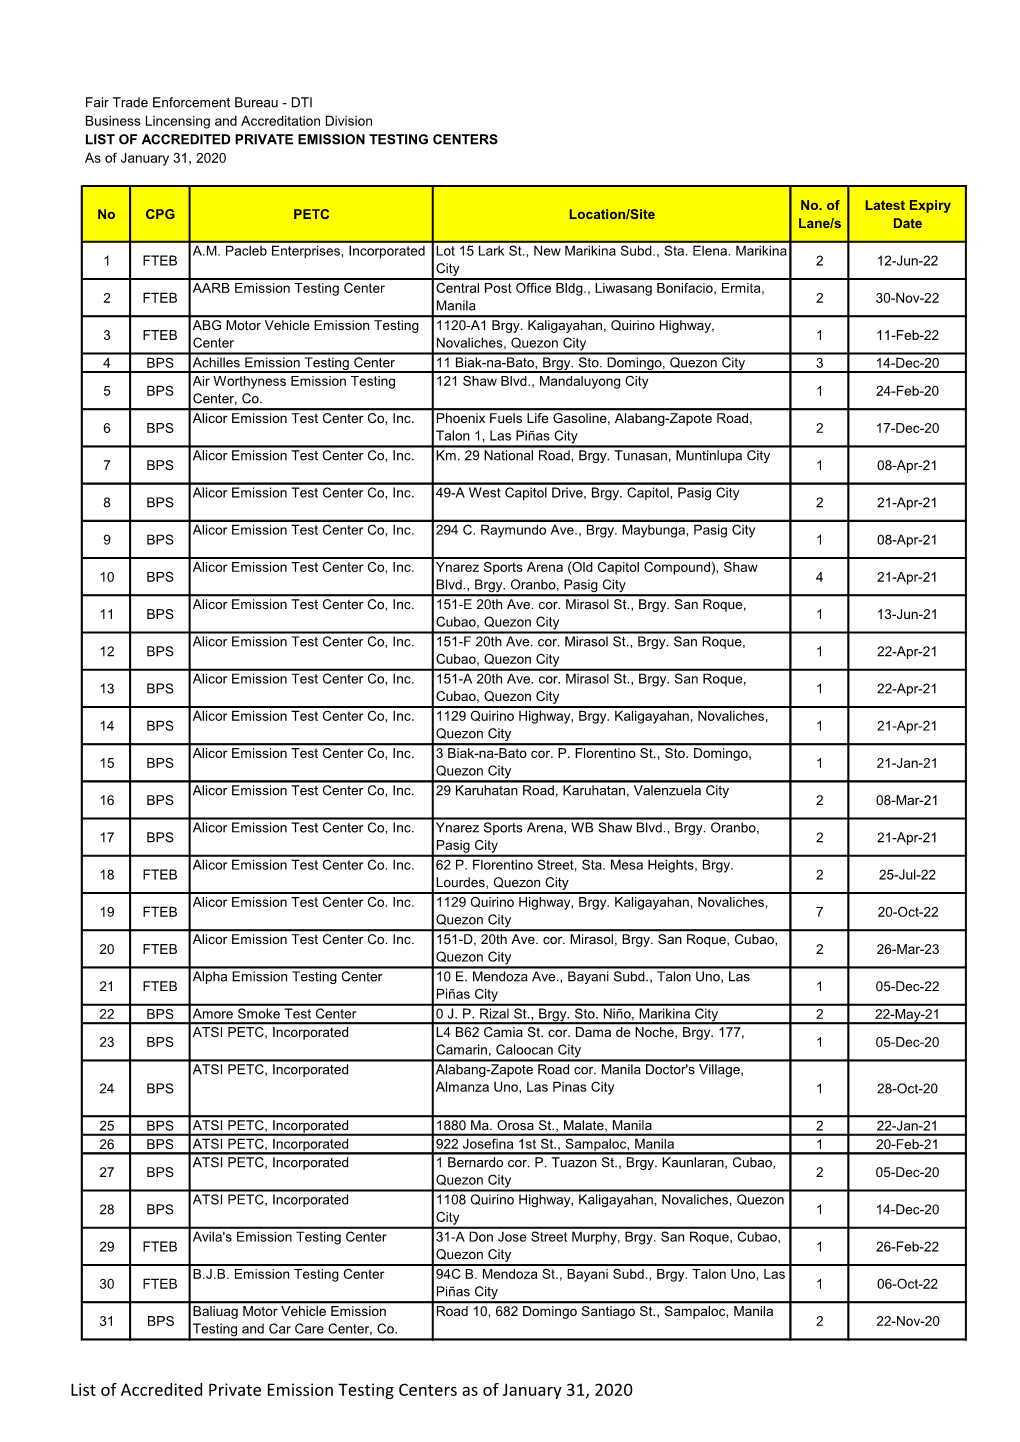 LIST of ACCREDITED PRIVATE EMISSION TESTING CENTERS As of January 31, 2020